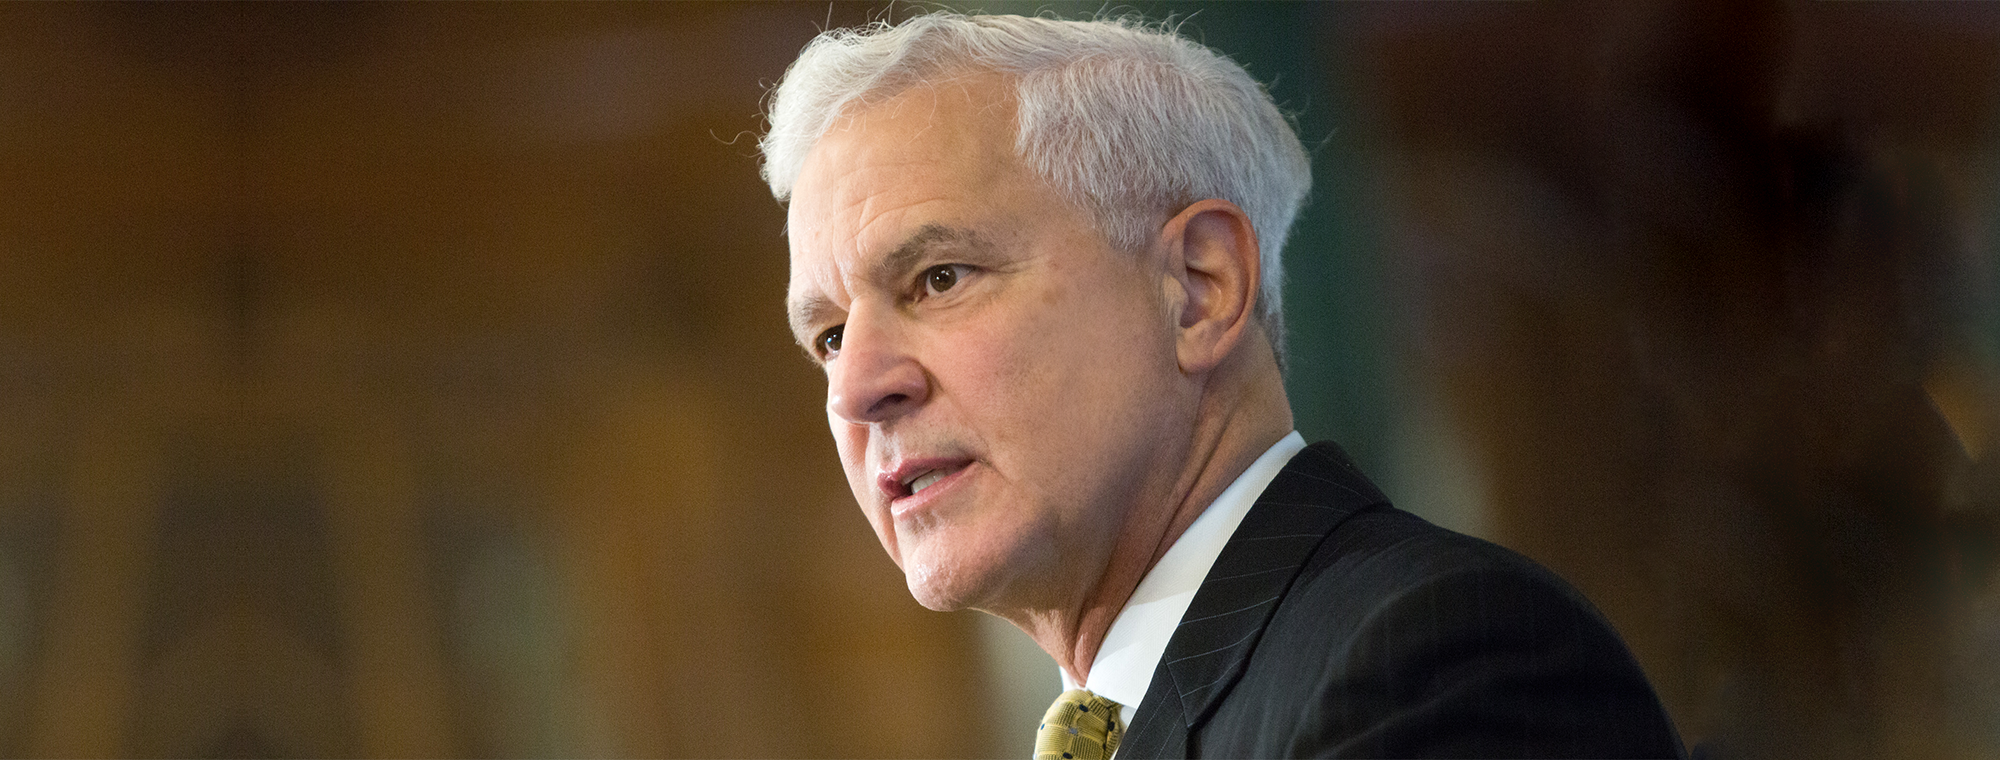 Joe Cirincione at "Nuclear Policy in a Time of Crisis," October 2018